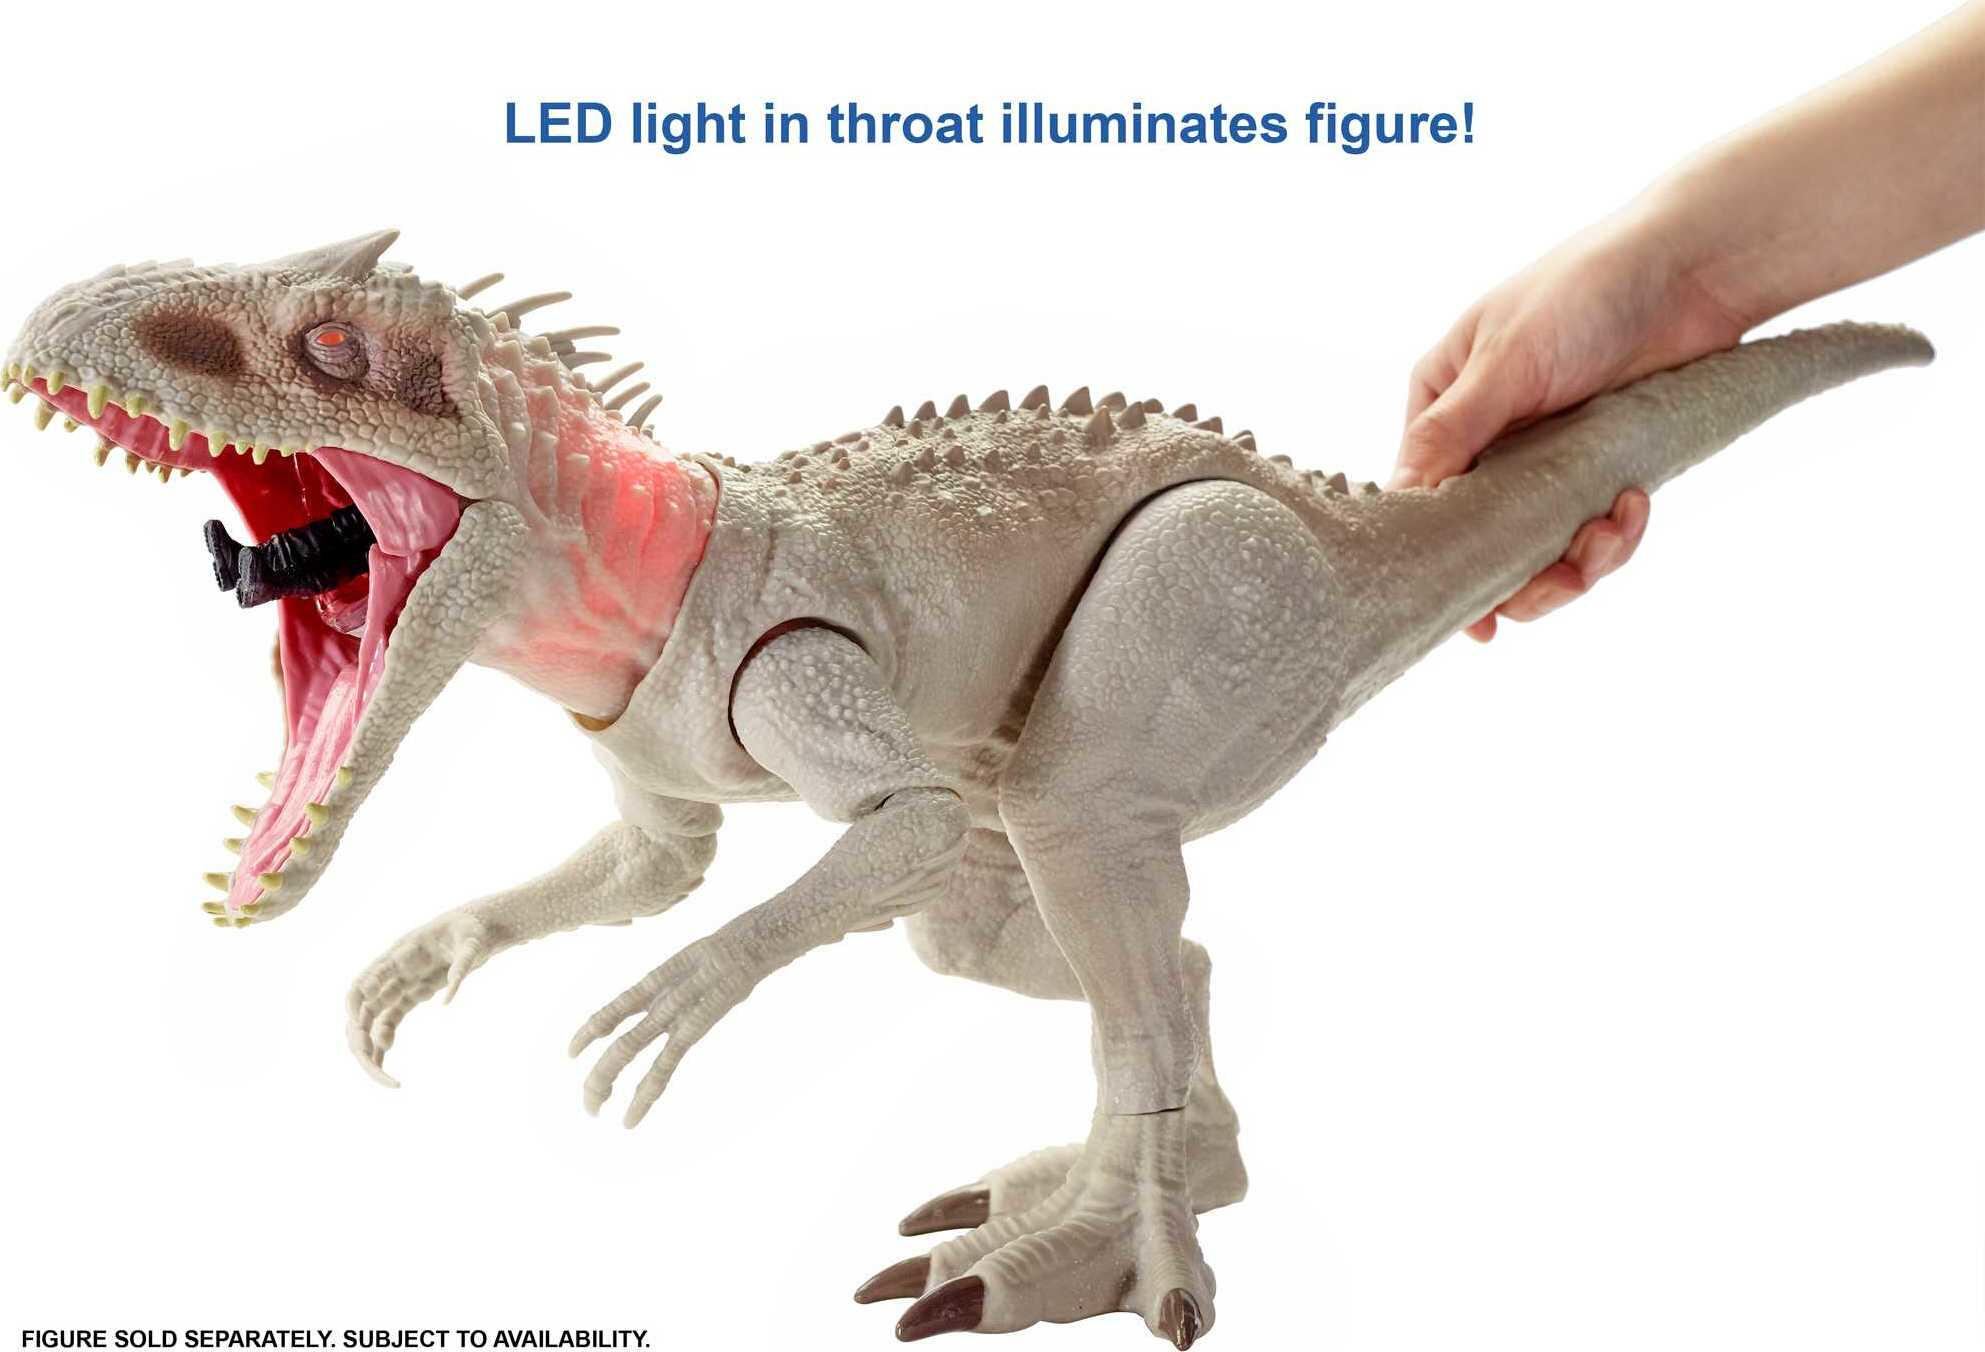 Jurassic World Destroy ‘N Devour Indominus Rex Dinosaur Action Figure with Motion, Sound and Eating Feature, Toy Gift - image 6 of 8